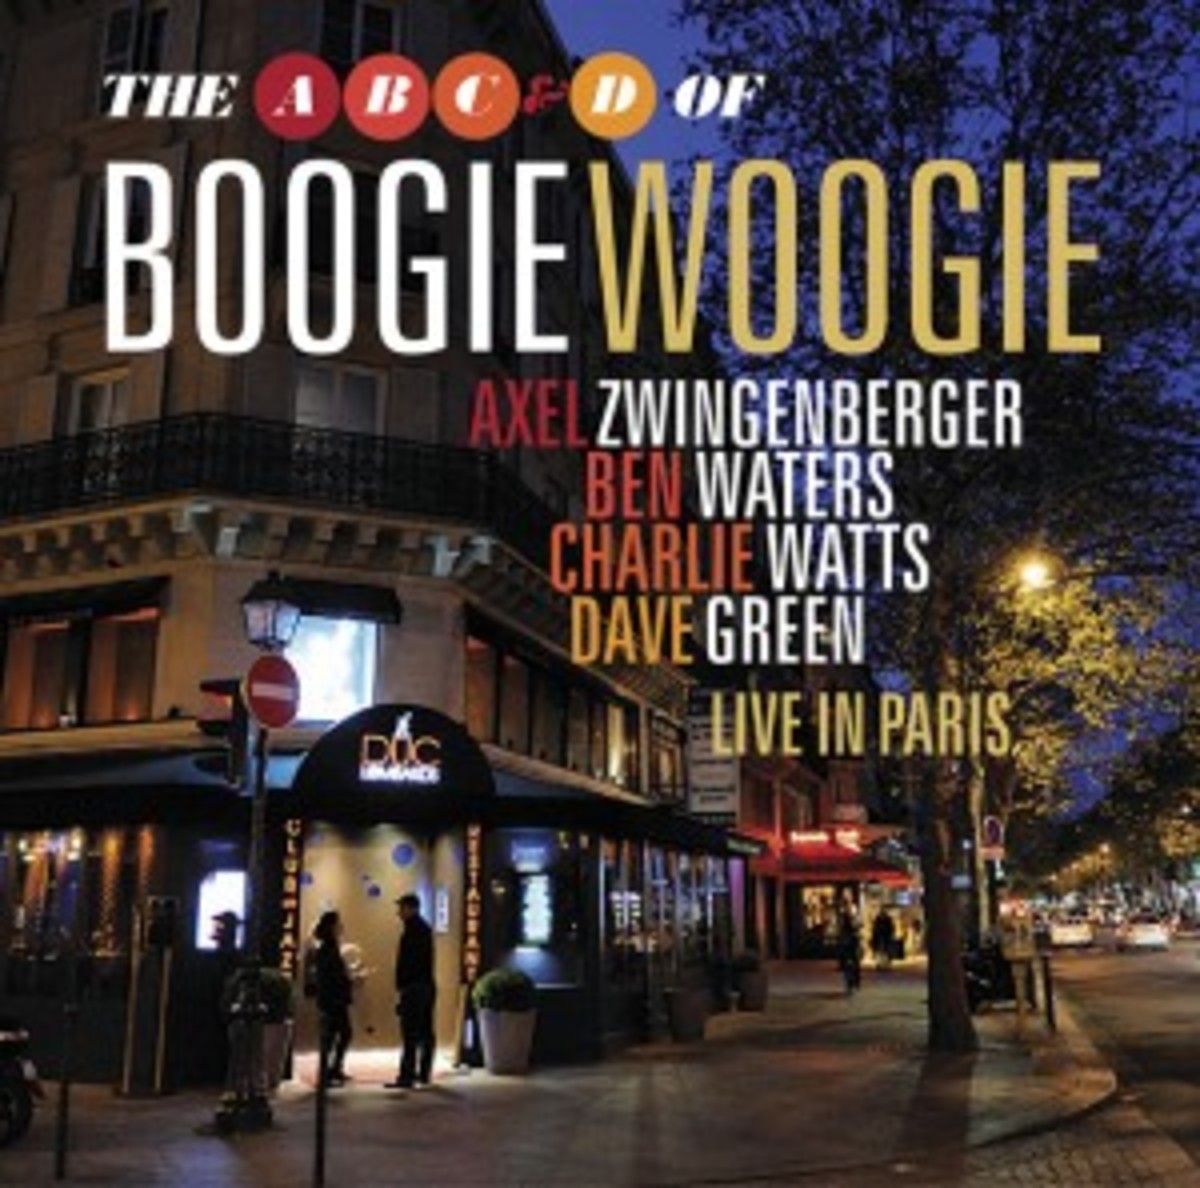 The ABC&D of Boogie Woogie